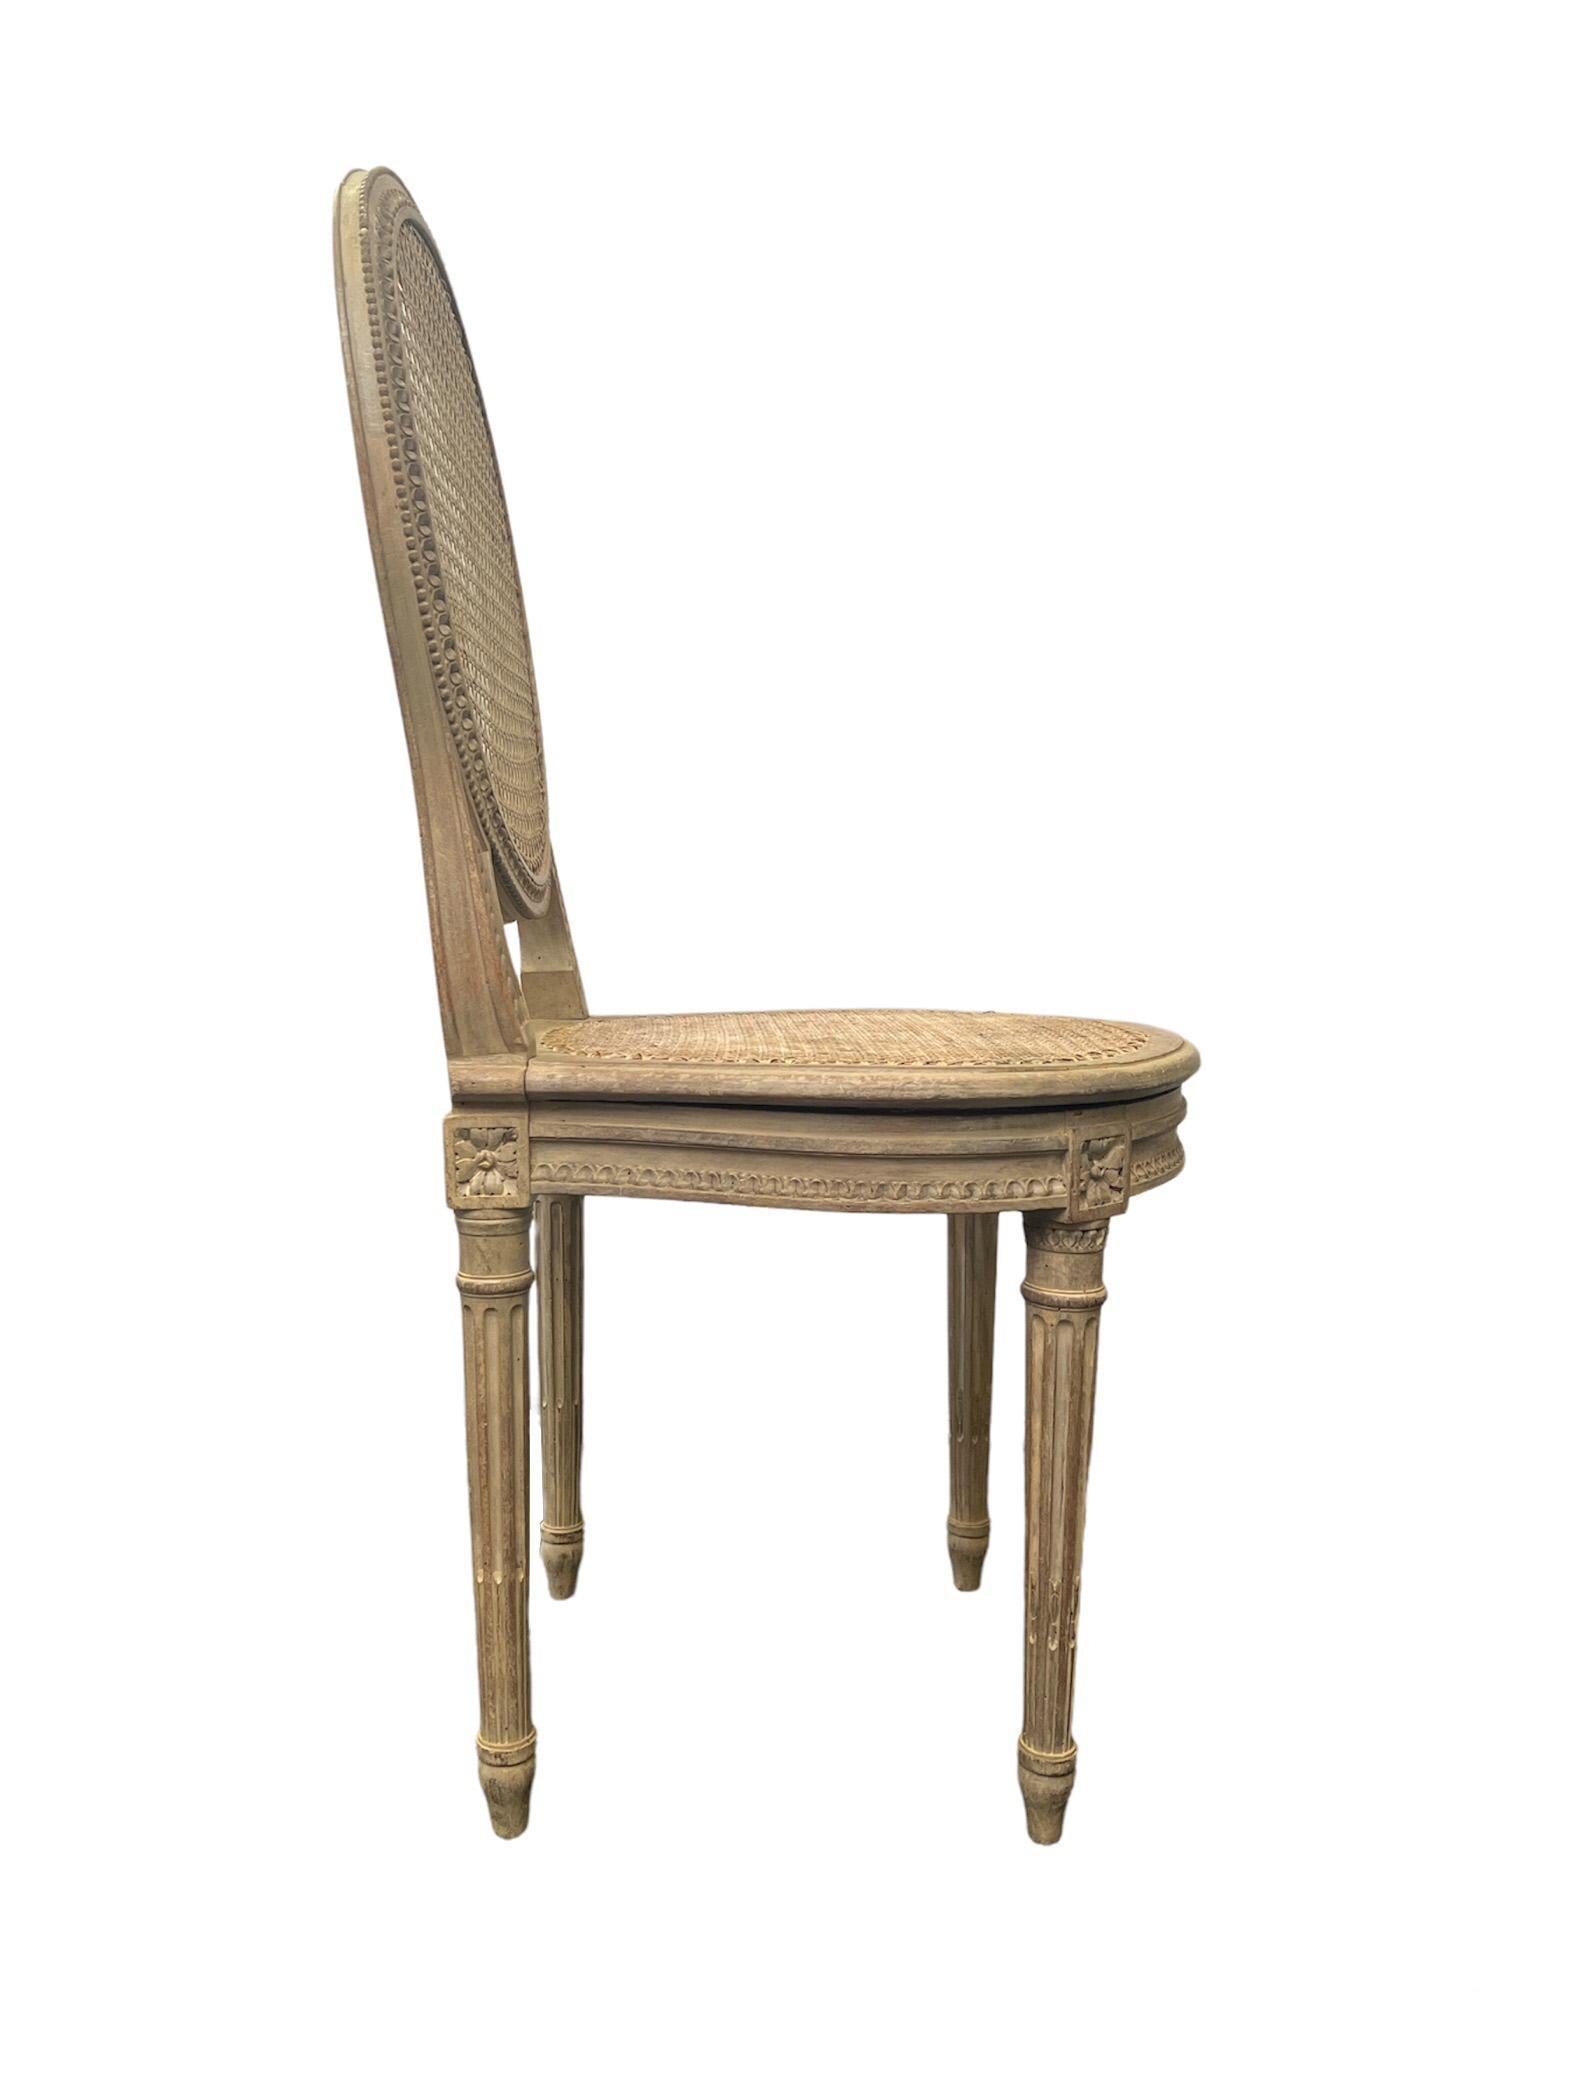 Caned balloon back side chair in the Louis XVI Style. The cane is in good condition and the chair still has its original patina. 

Property from esteemed interior designer Juan Montoya. Juan Montoya is one of the most acclaimed and prolific interior